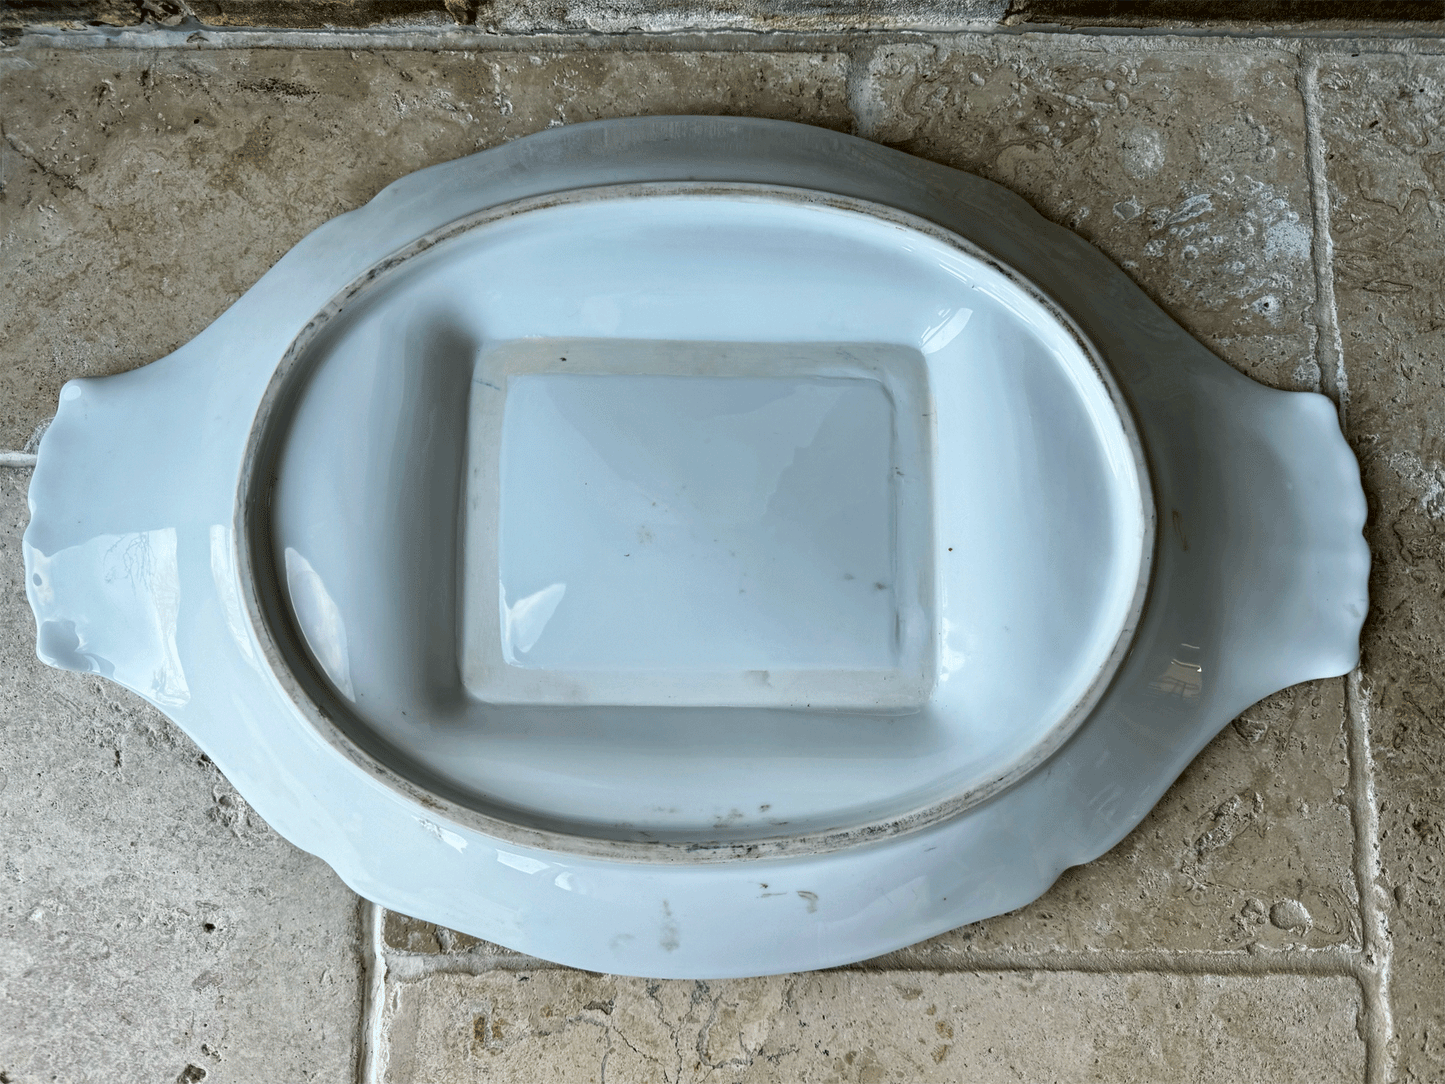 rare antique french extra large decorative white ironstone patisserie stand platter